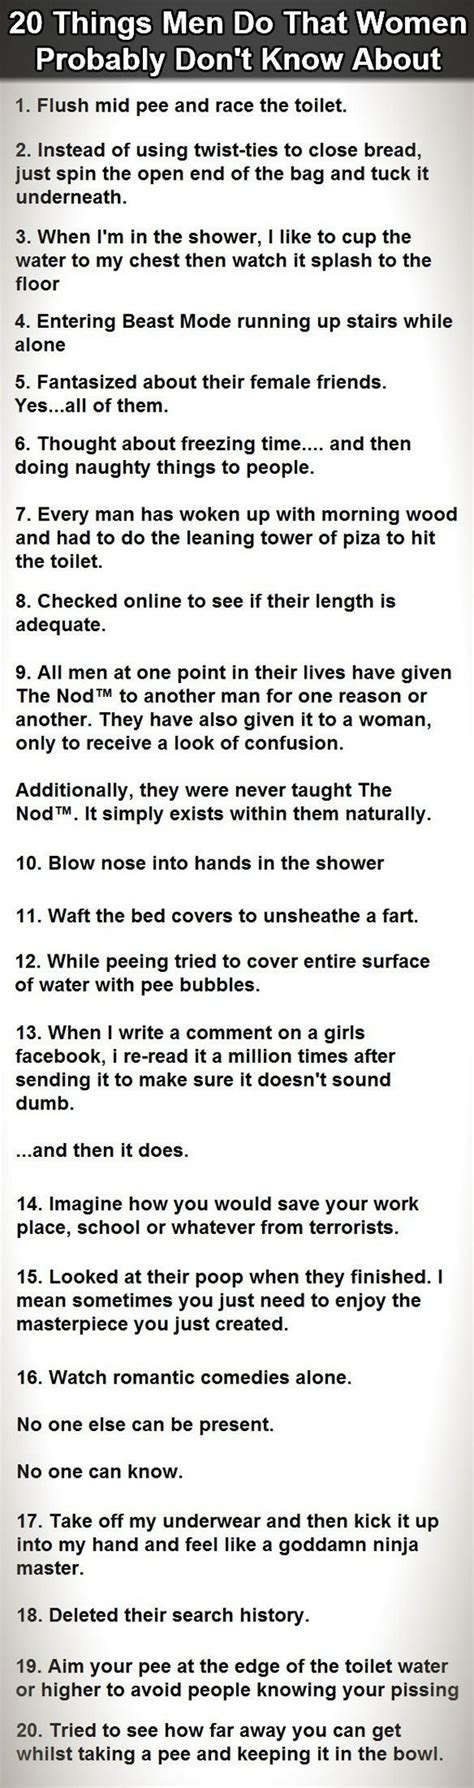 Here Are 20 Things Men Do That Women Don’t Know About Yes